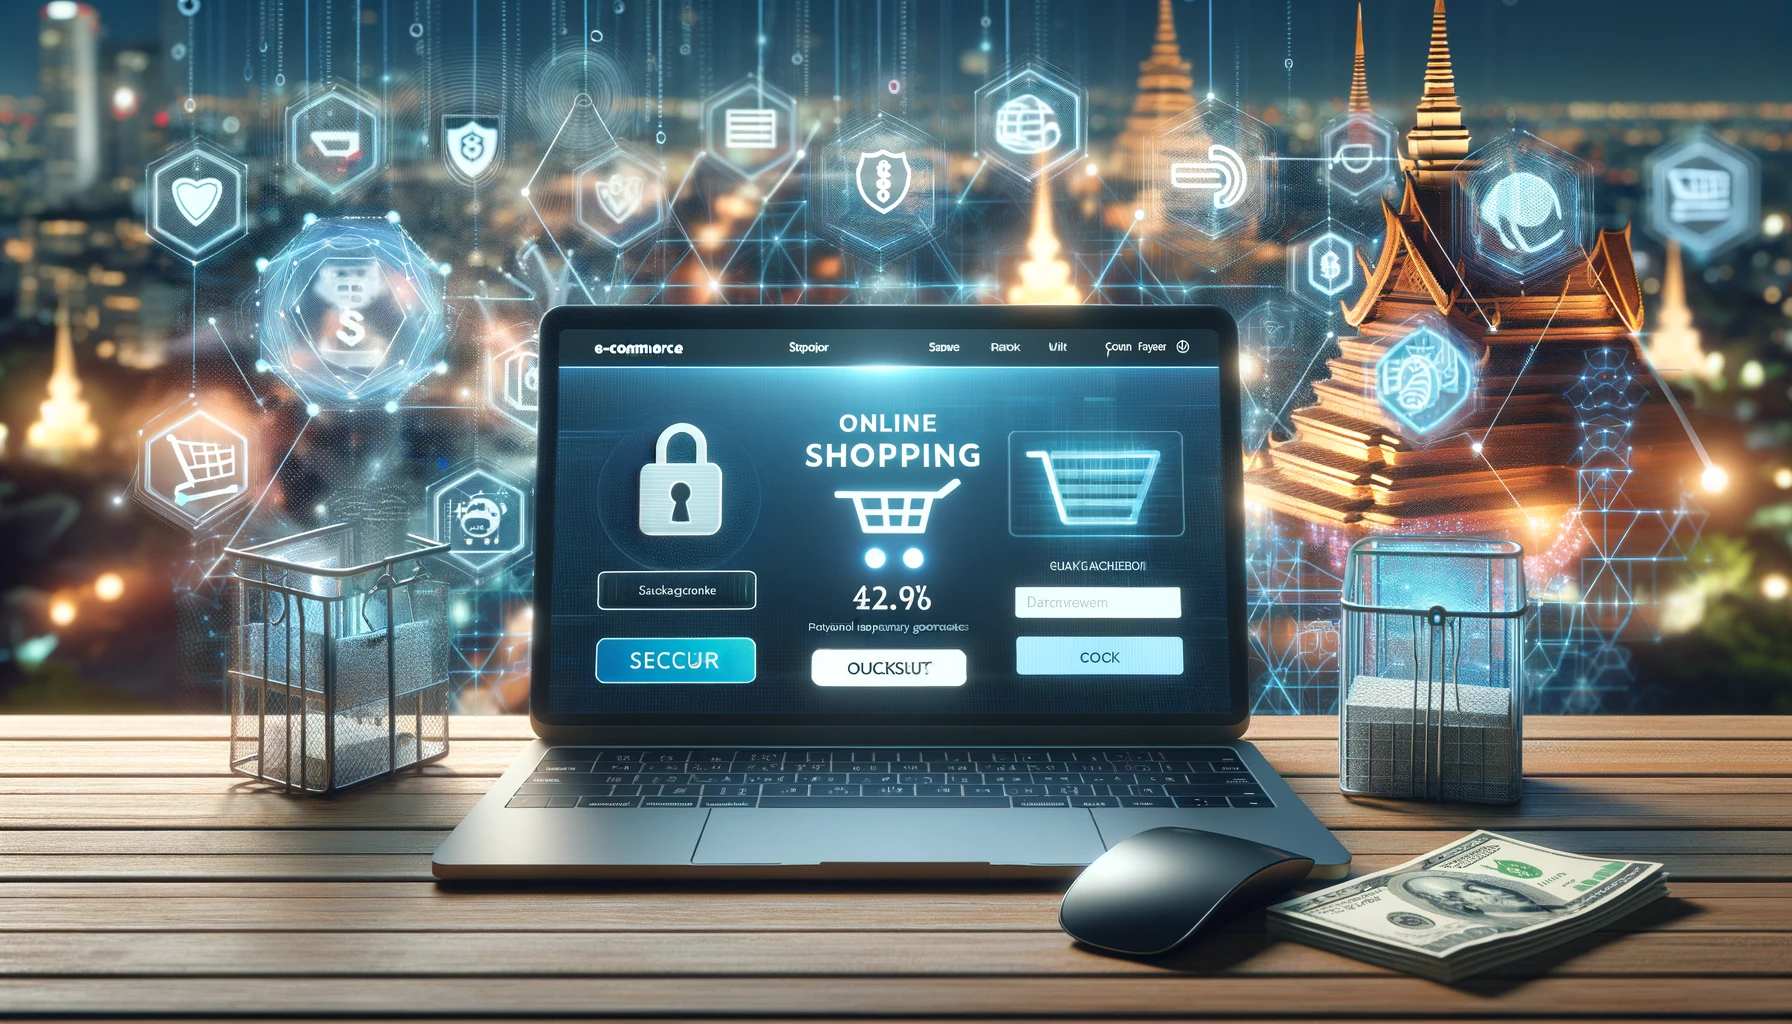 "Seamless integration of local payment gateways on an e-commerce platform, highlighting secure and user-friendly online shopping in Chiang Mai."